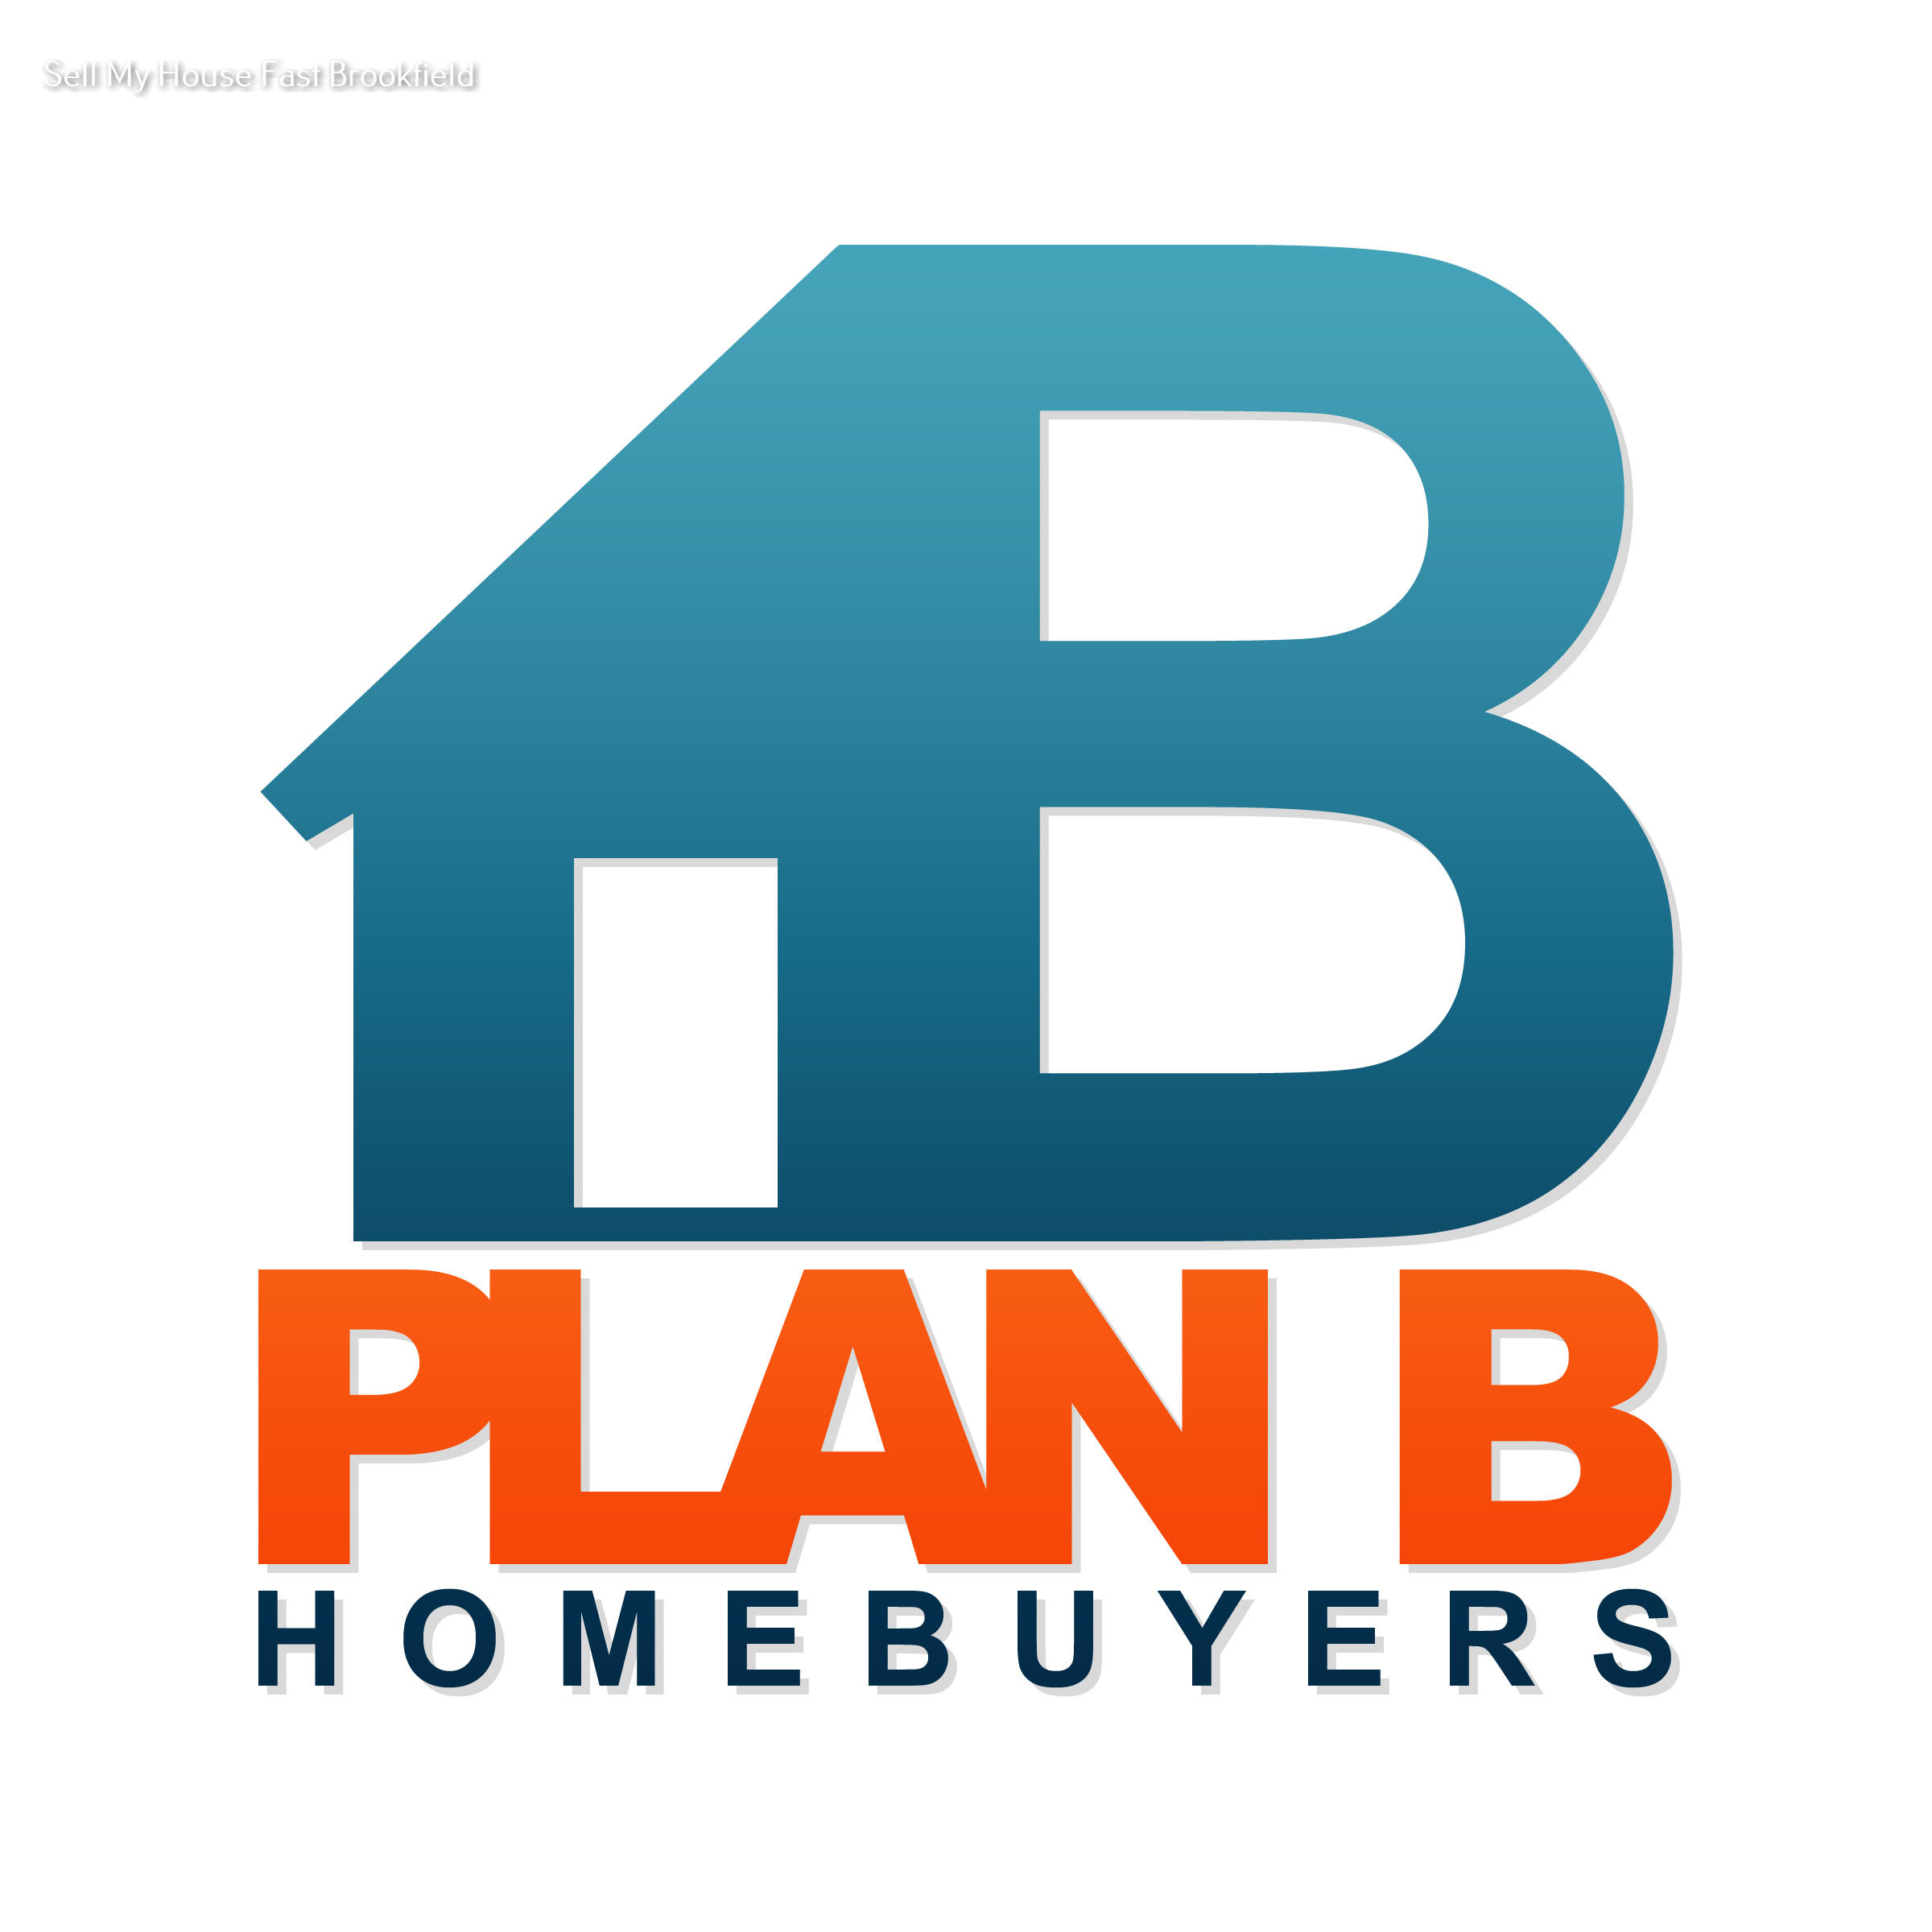 Plan B HomeBuyers Highlights the Value of Working with a Reputable Cash Home Buyer